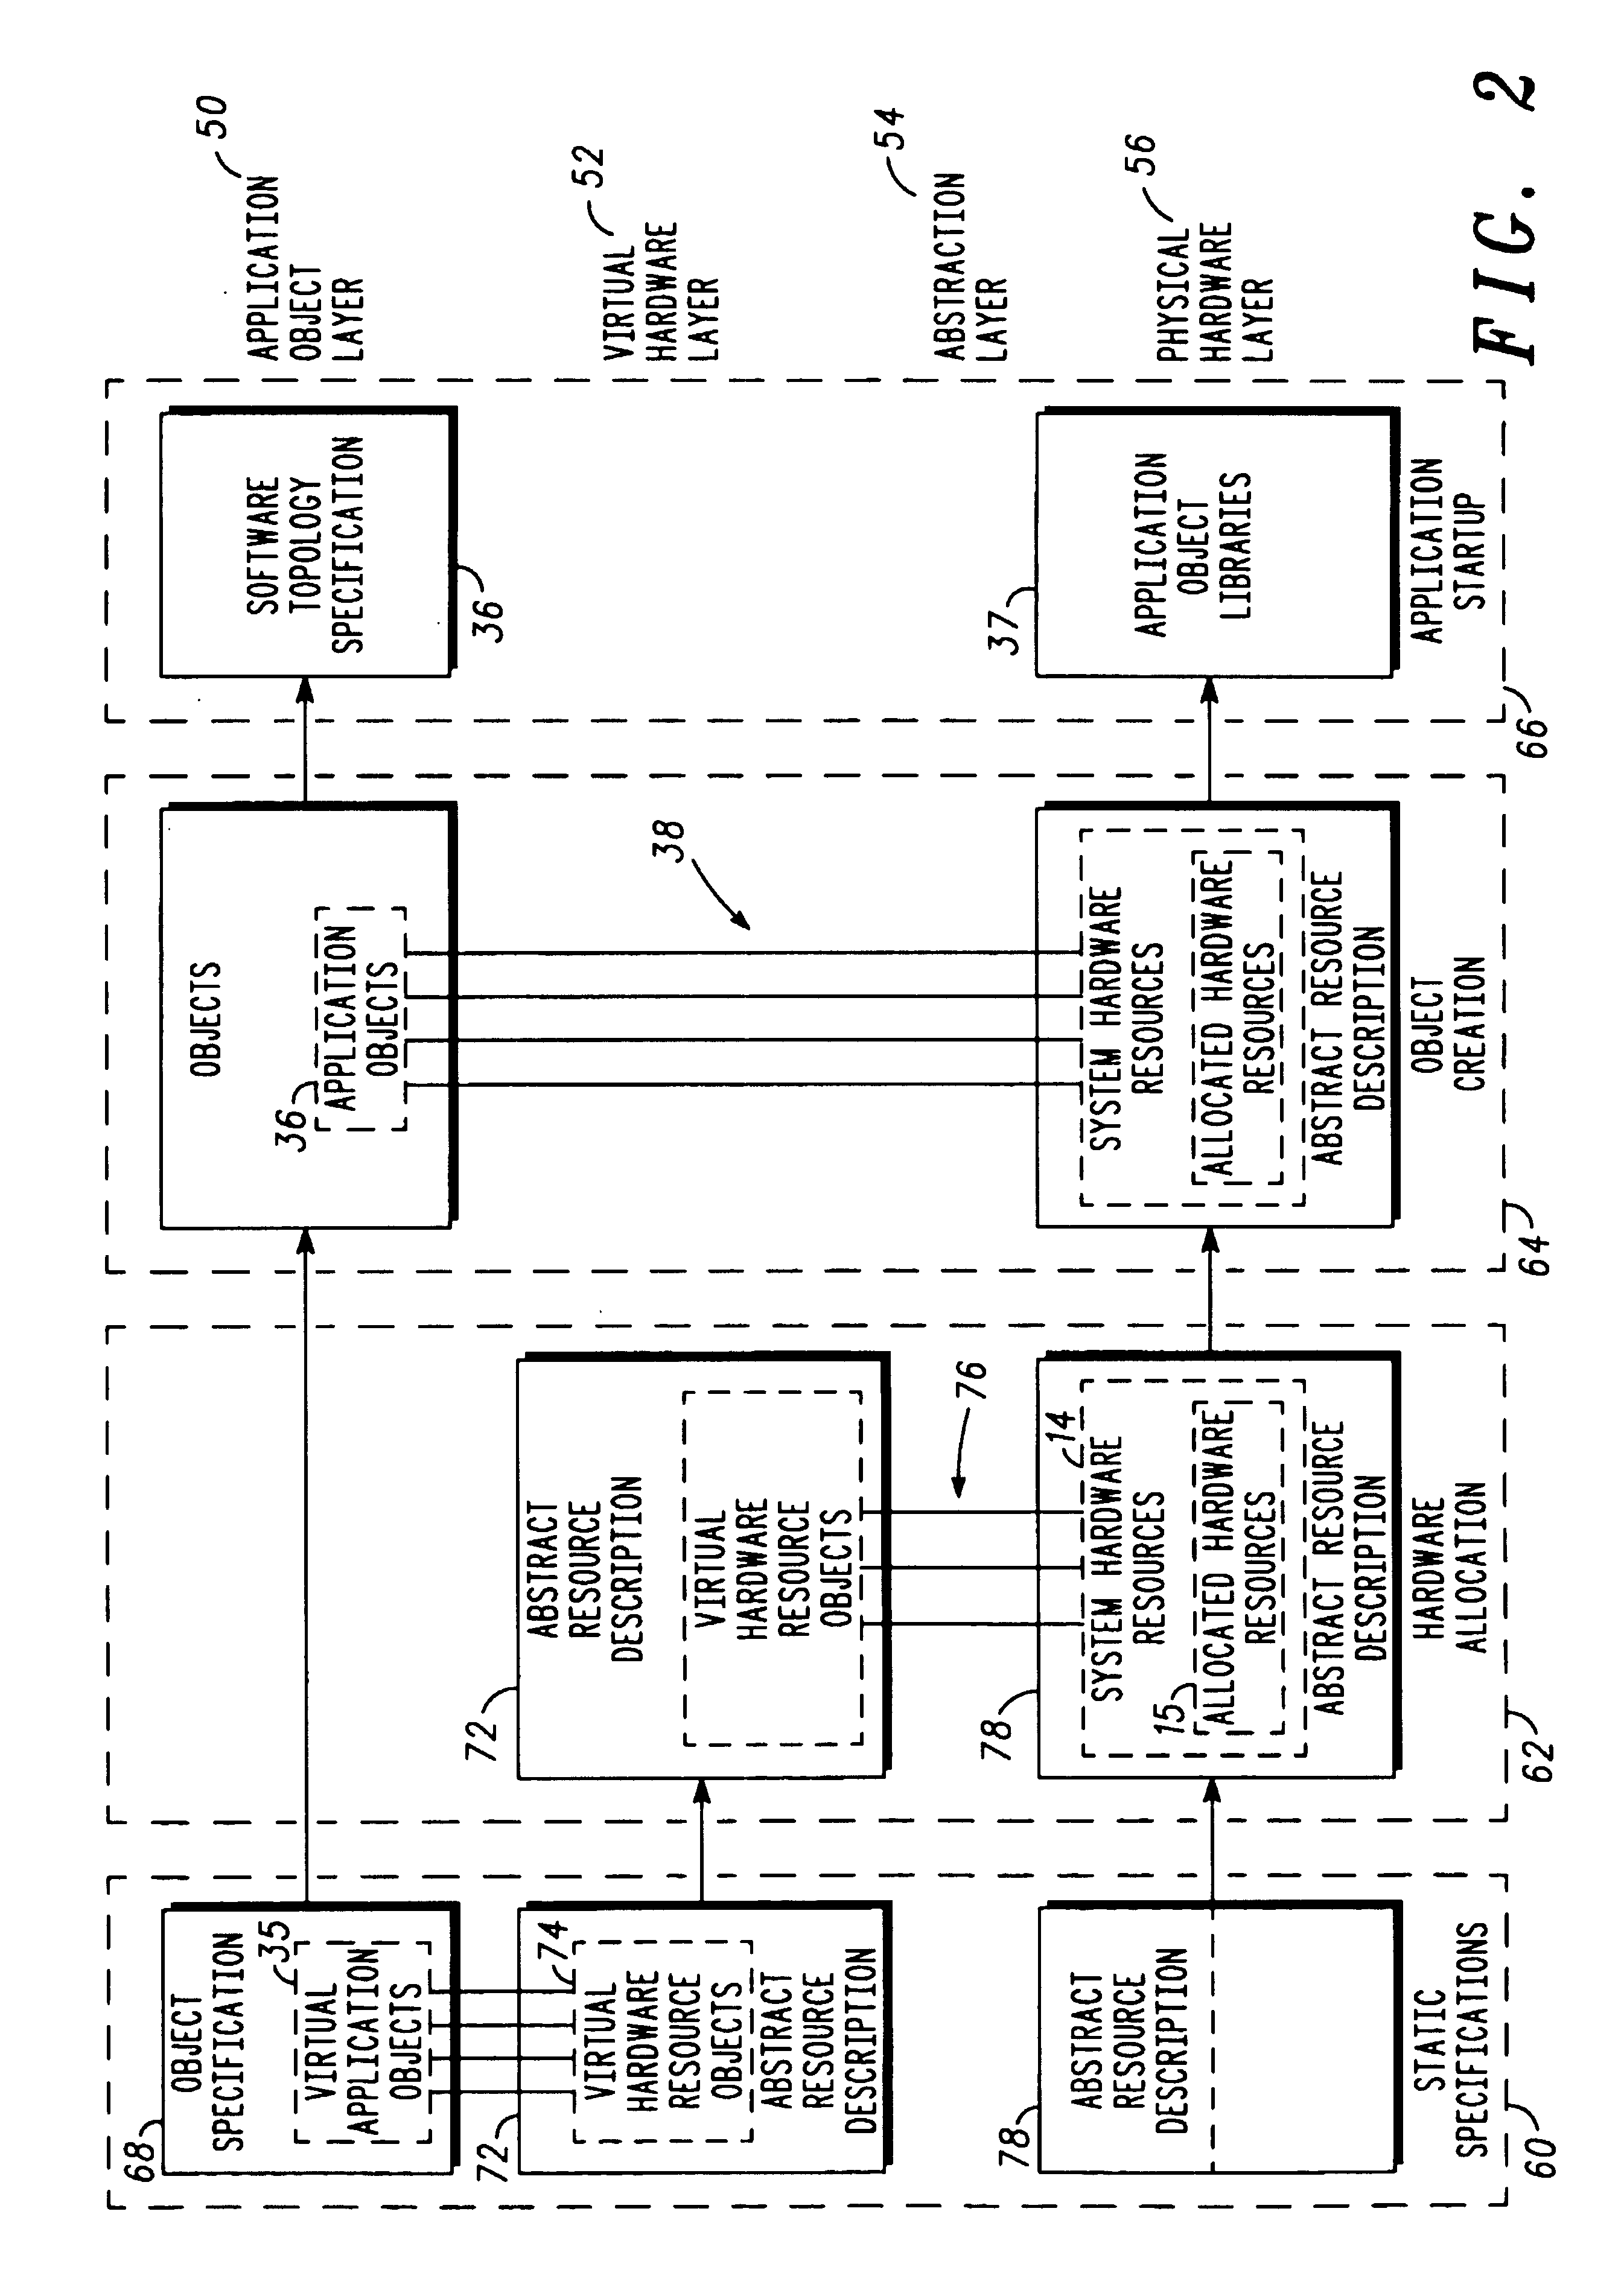 Hardware resource identifier for software-defined communications system